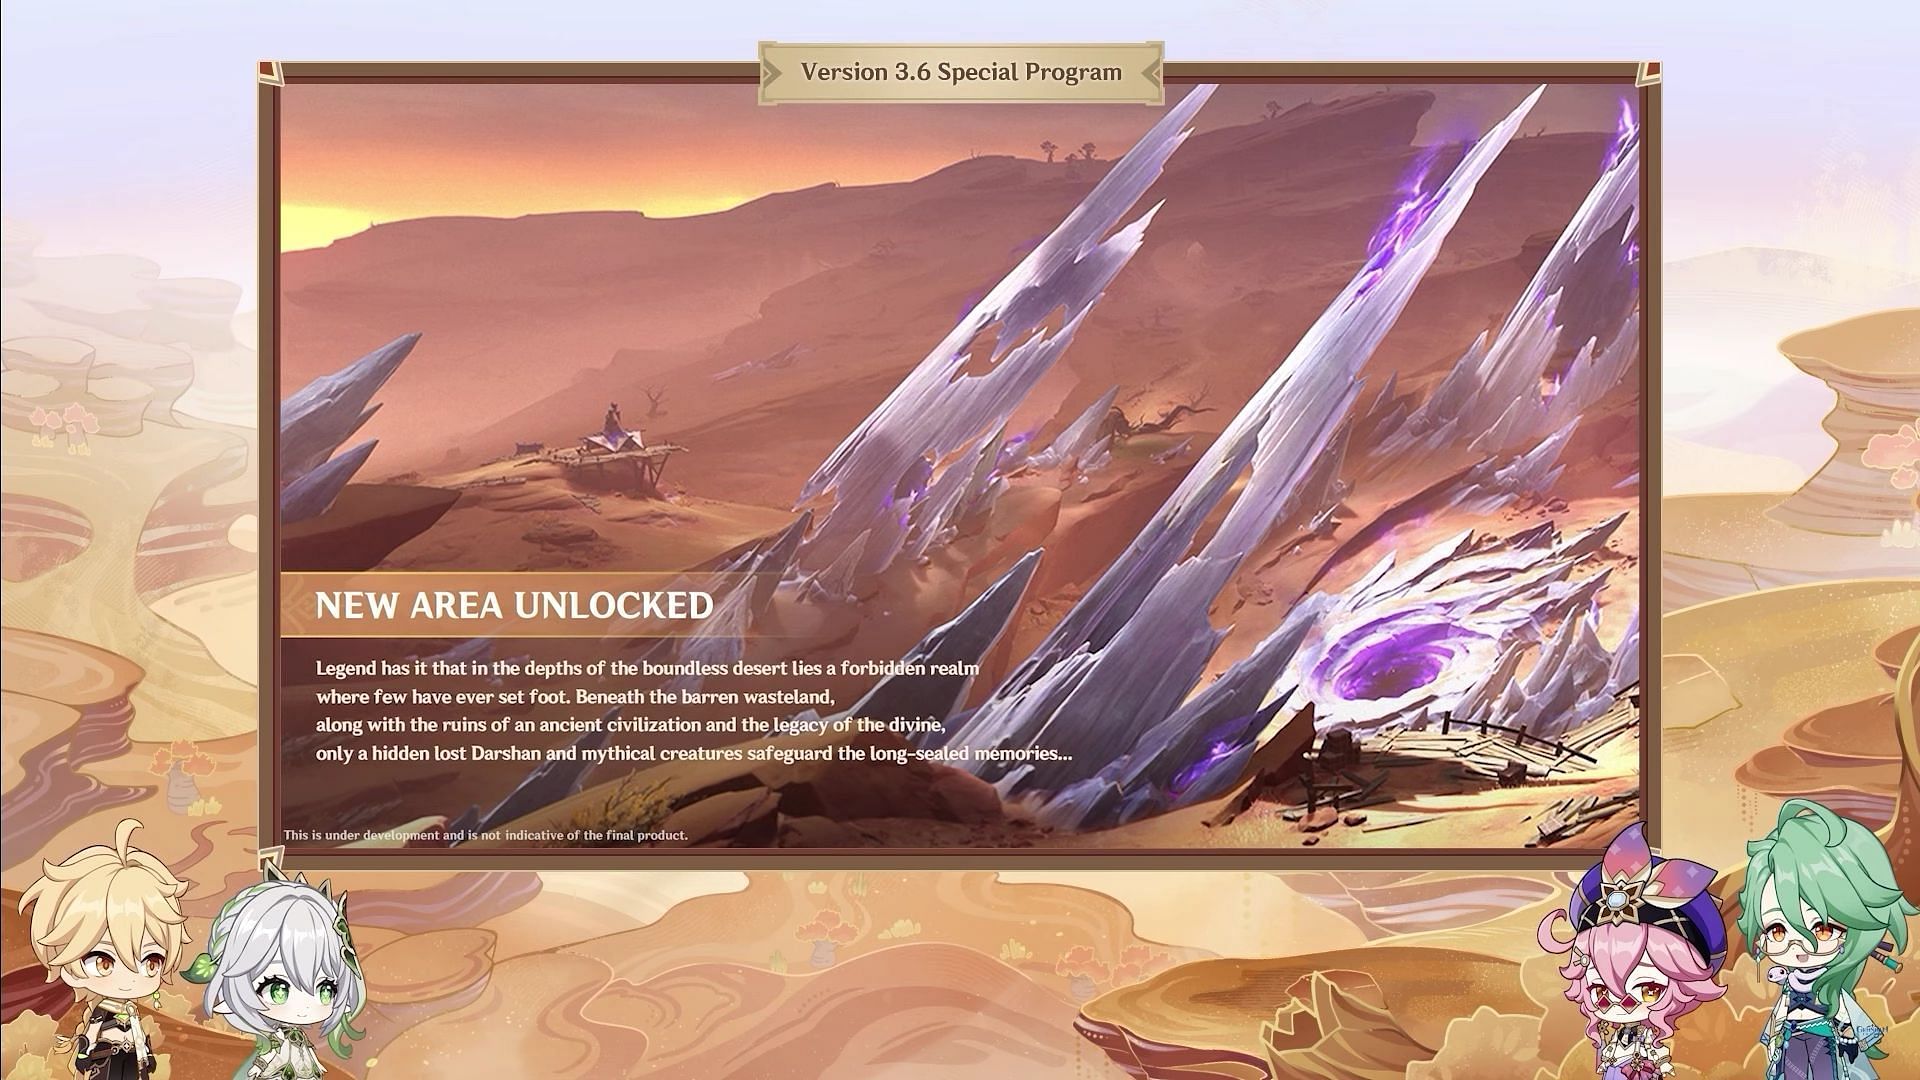 A new desert area will be unlocked in version 3.6 (Image via HoYoverse)